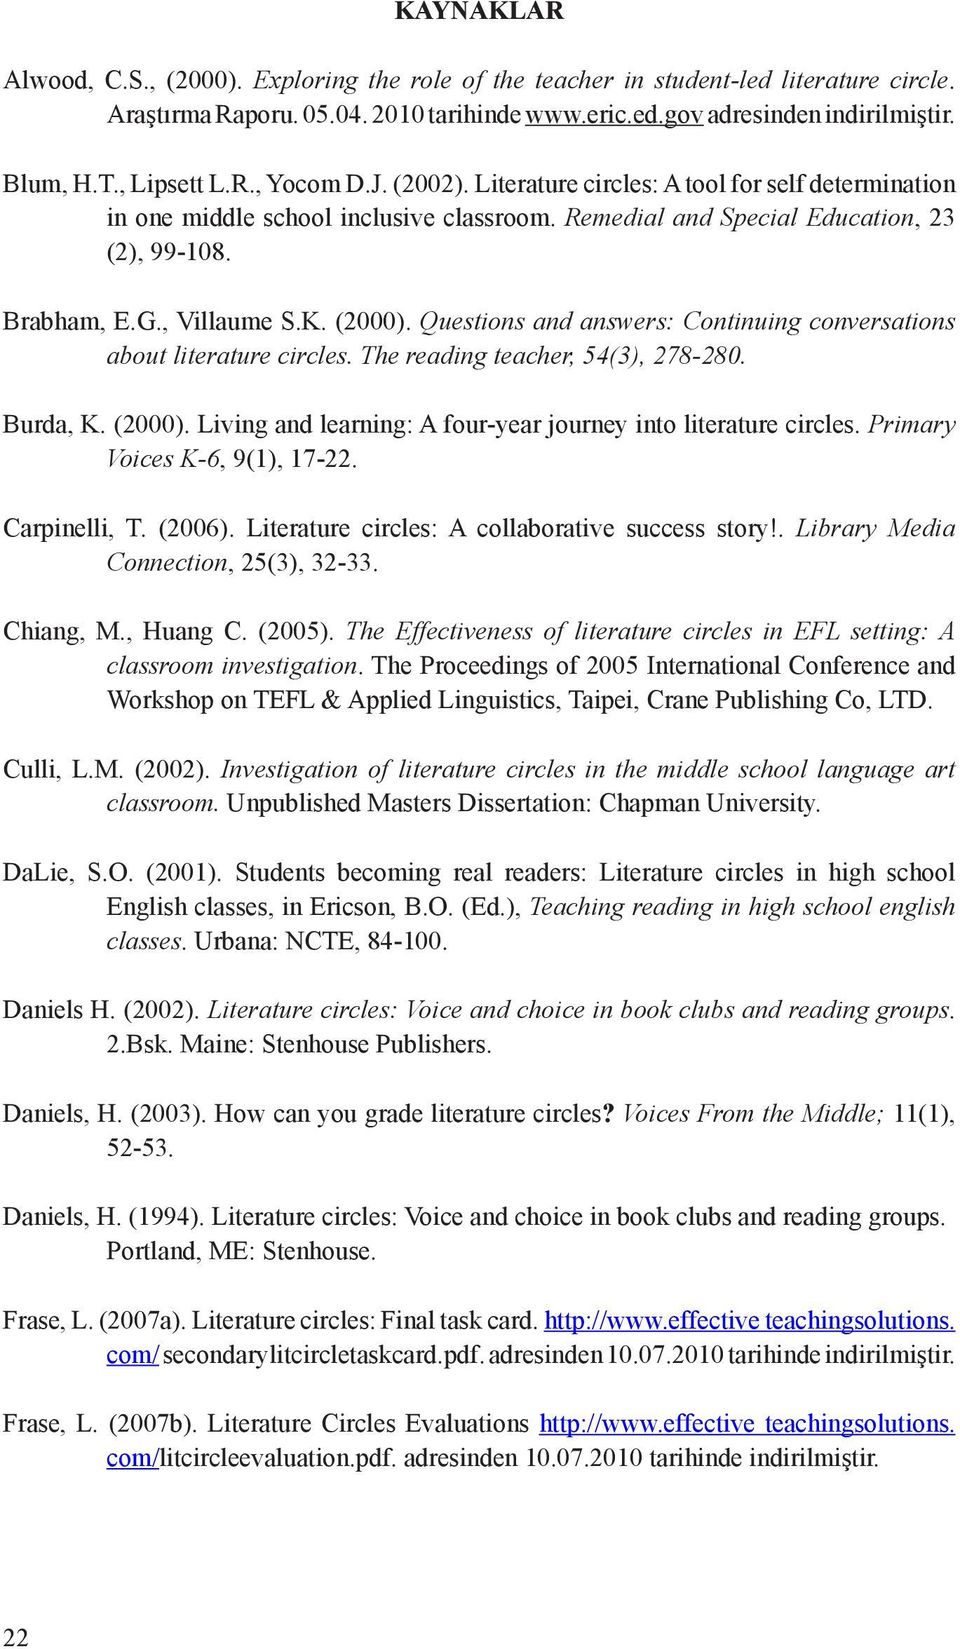 , Villaume S.K. (2000). Questions and answers: Continuing conversations about literature circles. The reading teacher, 54(3), 278-280. Burda, K. (2000). Living and learning: A four-year journey into literature circles.